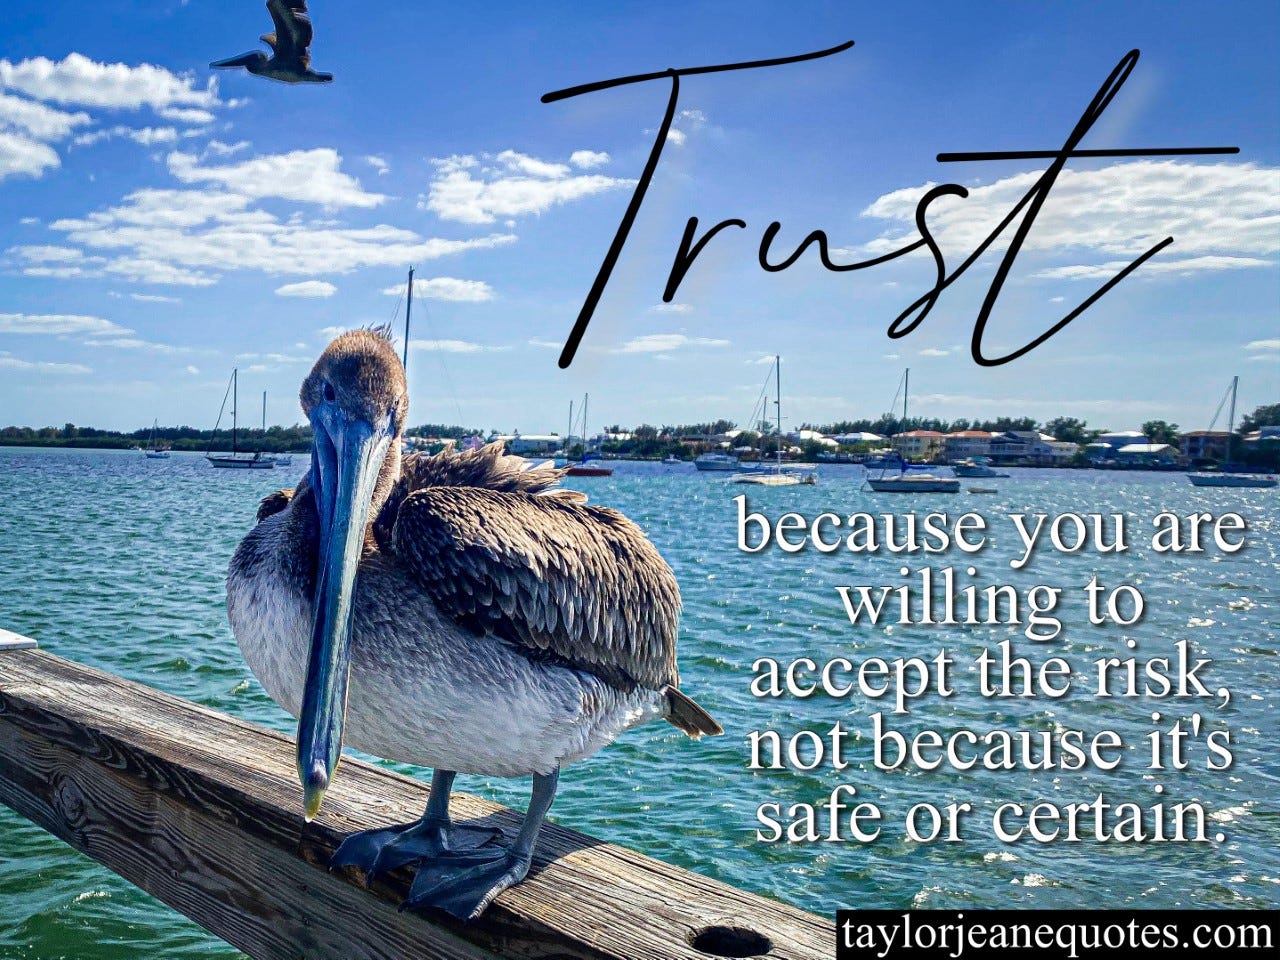 taylor jeane quotes, taylor wilson, taylor jeane, free quote of the day email subscription, daily quote emails free, inspirational quotes, motivational quotes, trust quotes, risk taking quotes, life quotes, intuition quotes, mindset quotes, confidence quotes, challenge yourself quotes, anna maria island, florida, beach, pelican